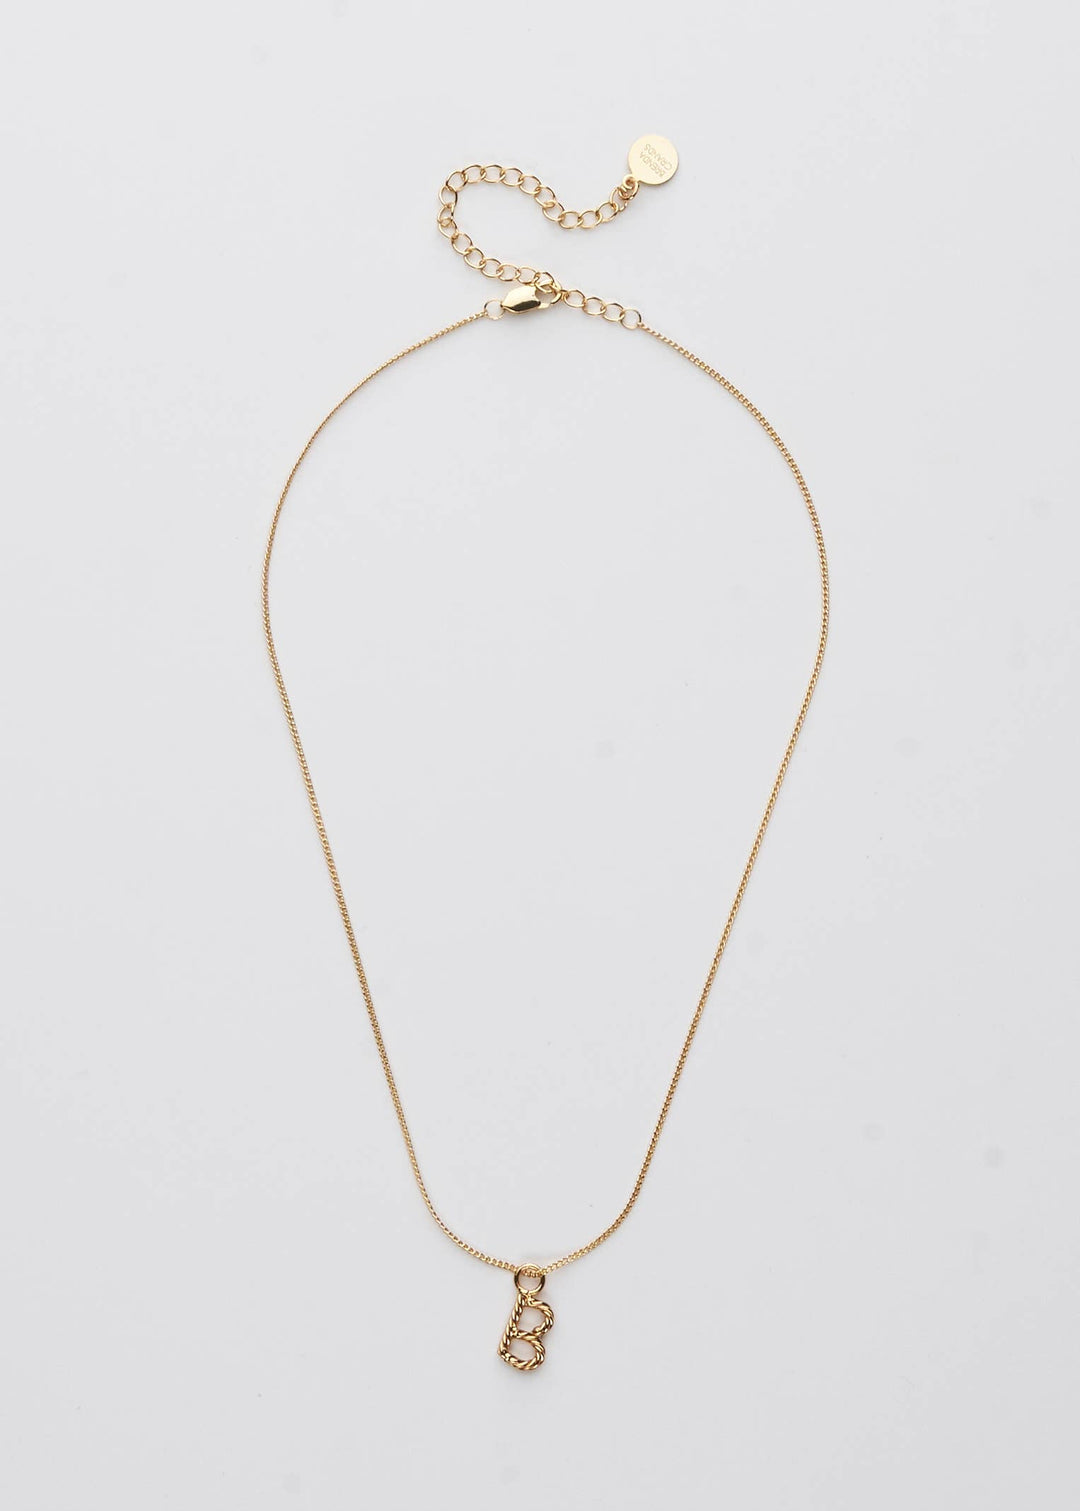 Aspen Initial Mini Necklace: Holiday Favorite!: M / 14"+3"